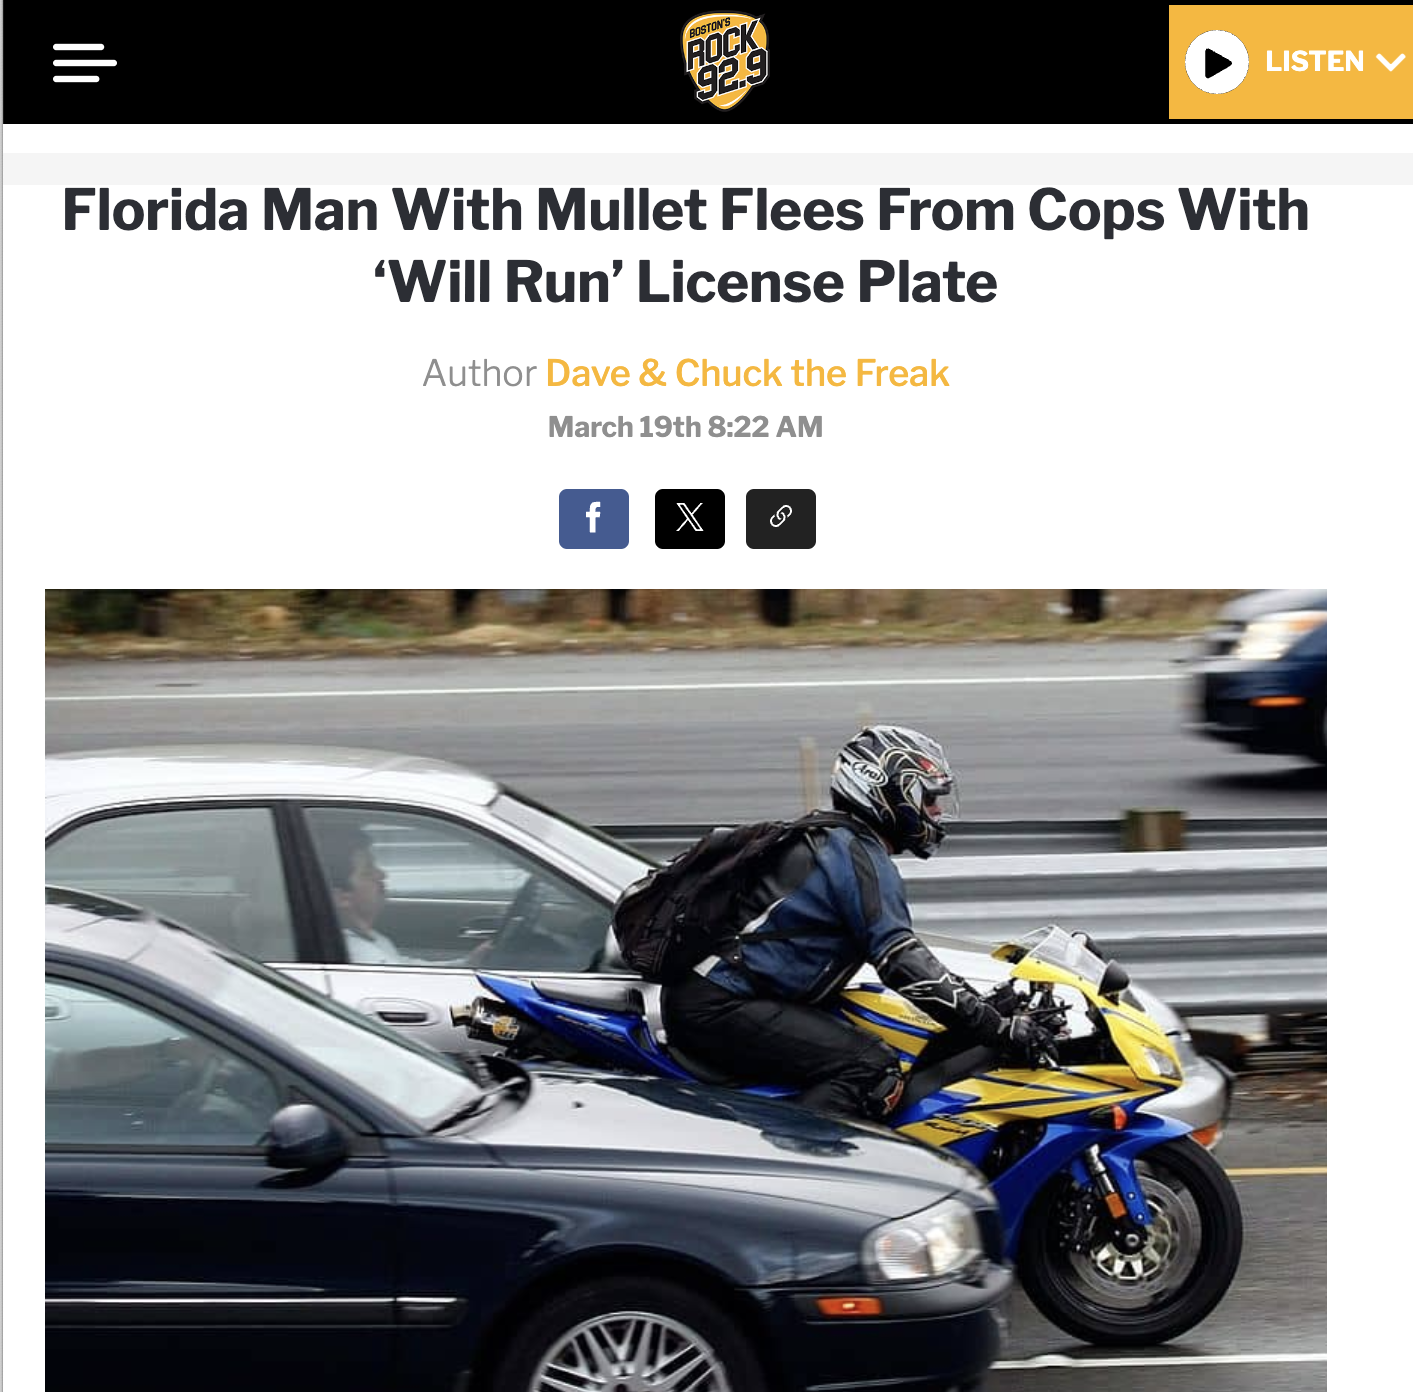 motorcycles more dangerous than cars - Rock 92.9 Listen V Florida Man With Mullet Flees From Cops With 'Will Run' License Plate Author Dave & Chuck the Freak March 19th fX